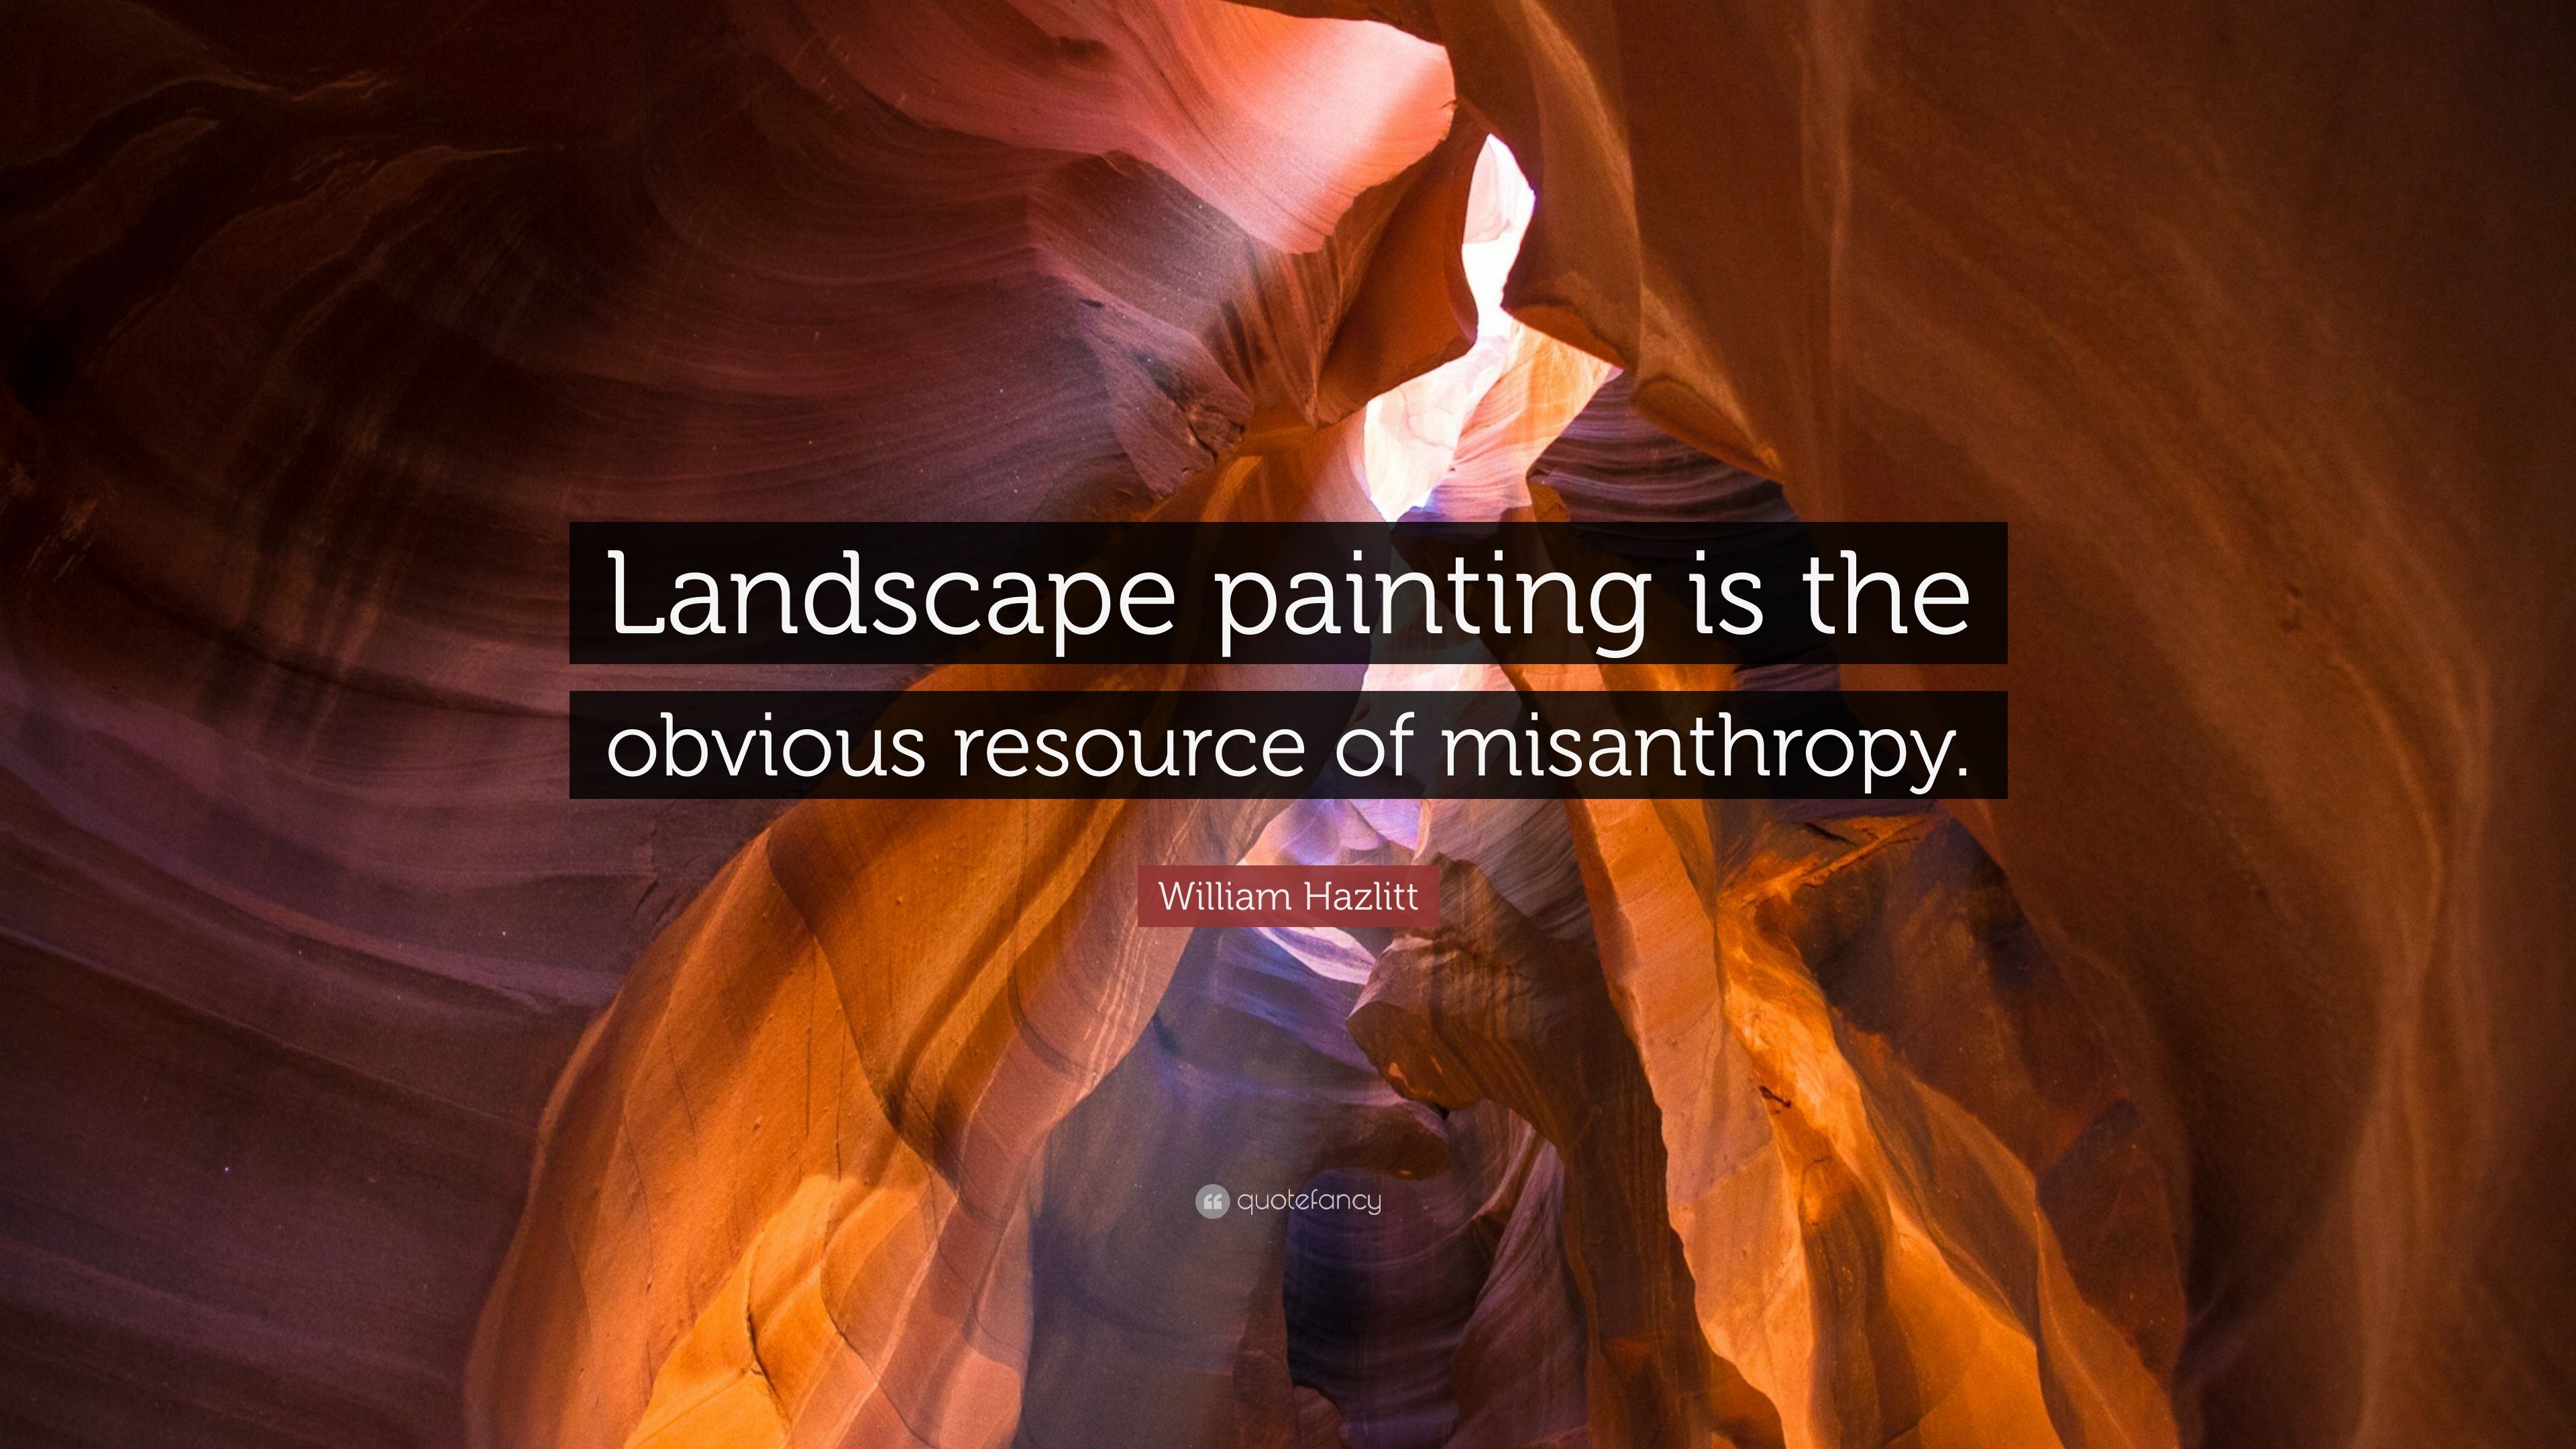 William Hazlitt Quote: “Landscape painting is the obvious resource of misanthropy.”